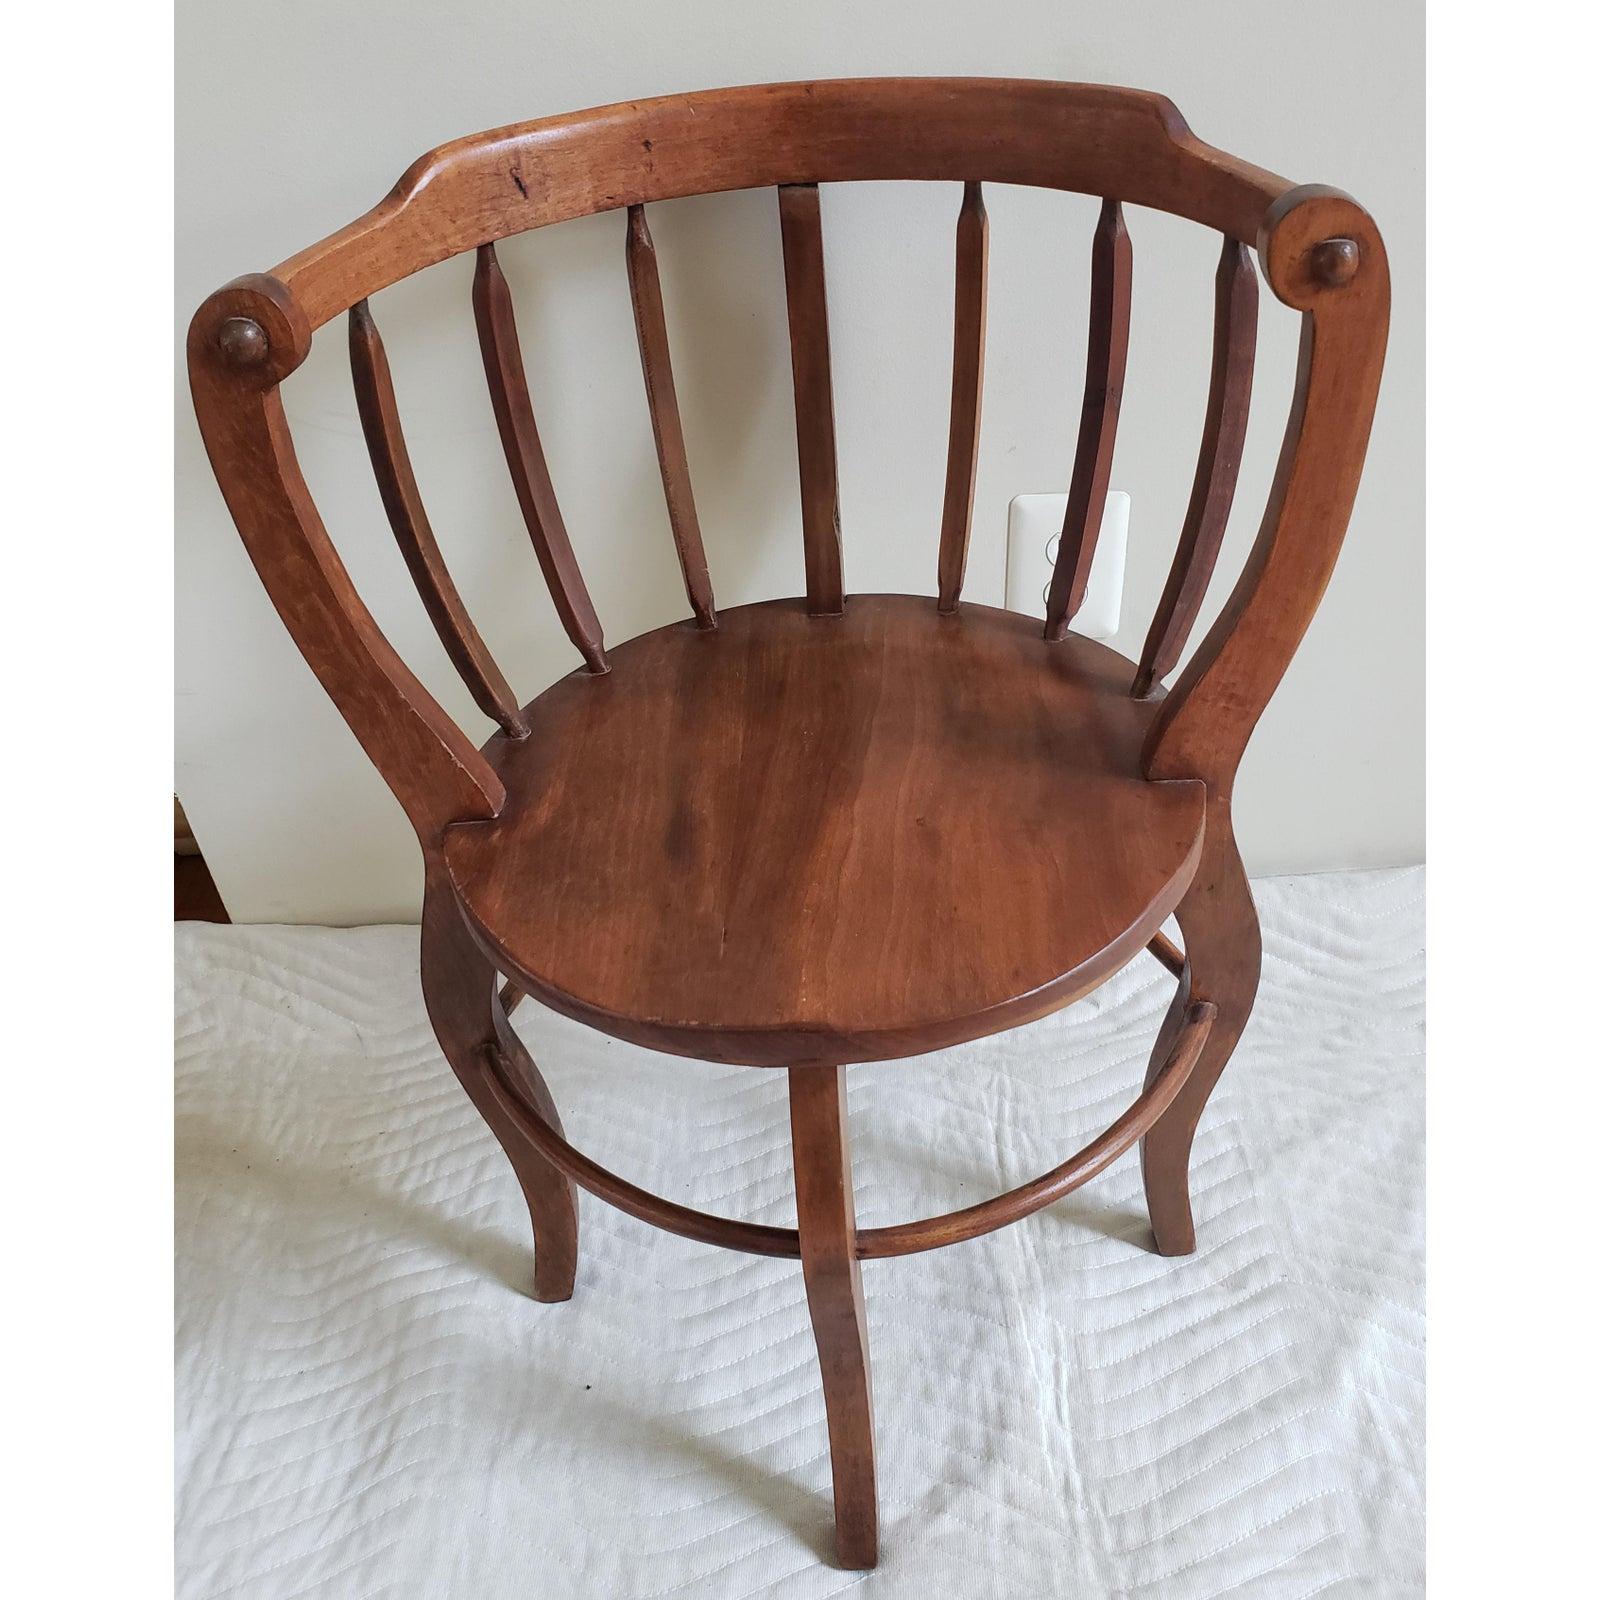 American Colonial Antique Round Chair with Vine Connecting Legs For Sale